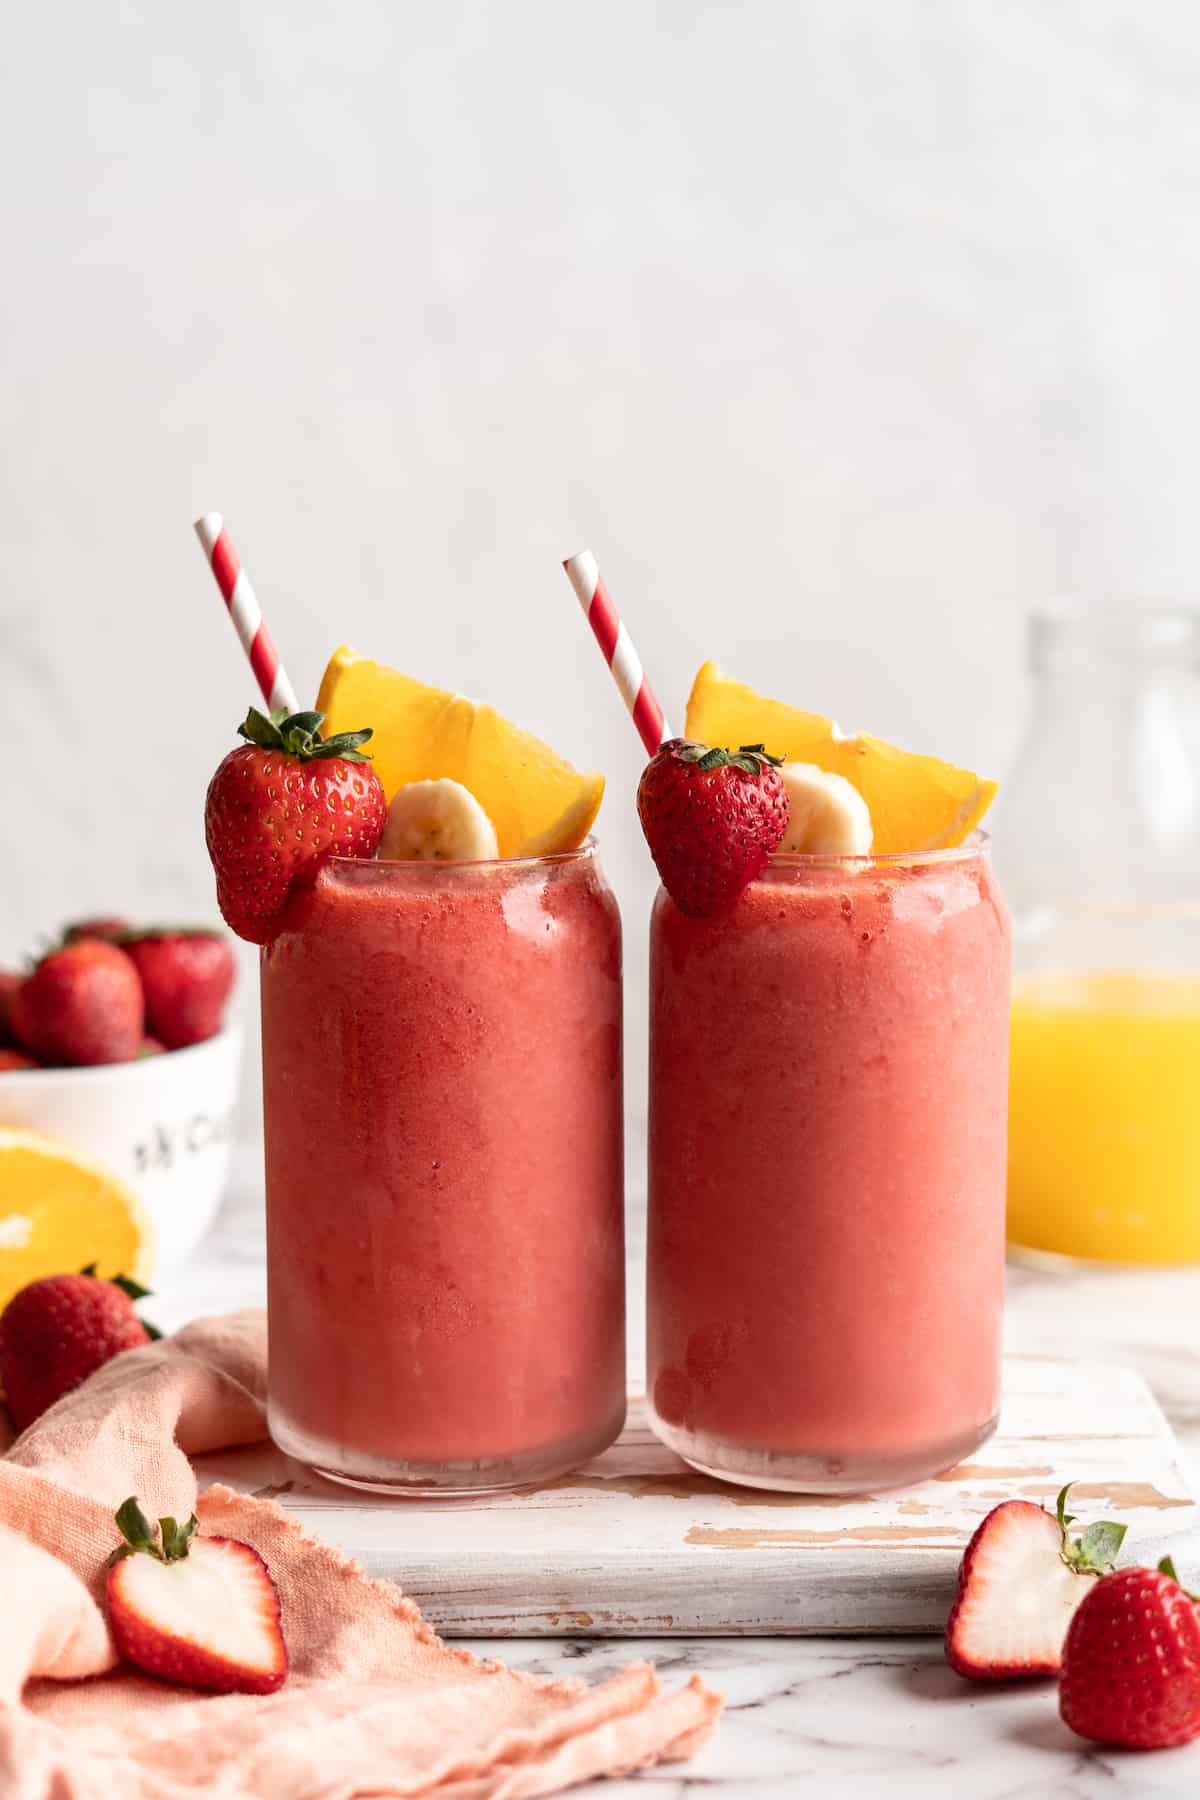 2 glasses of strawberry banana smoothie with straws and fresh fruit for garnish